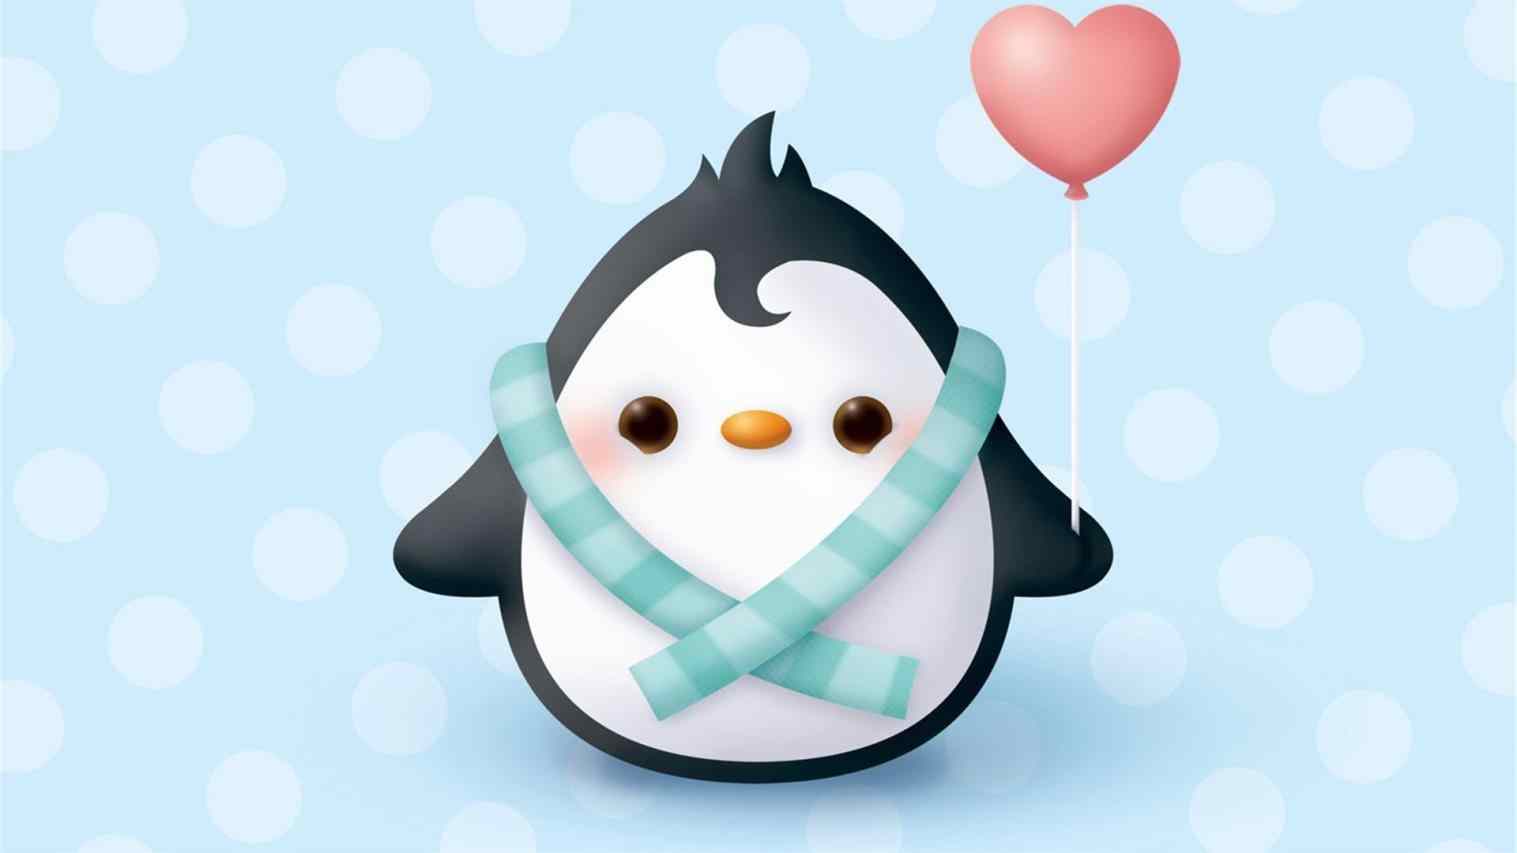 animated clipart cute